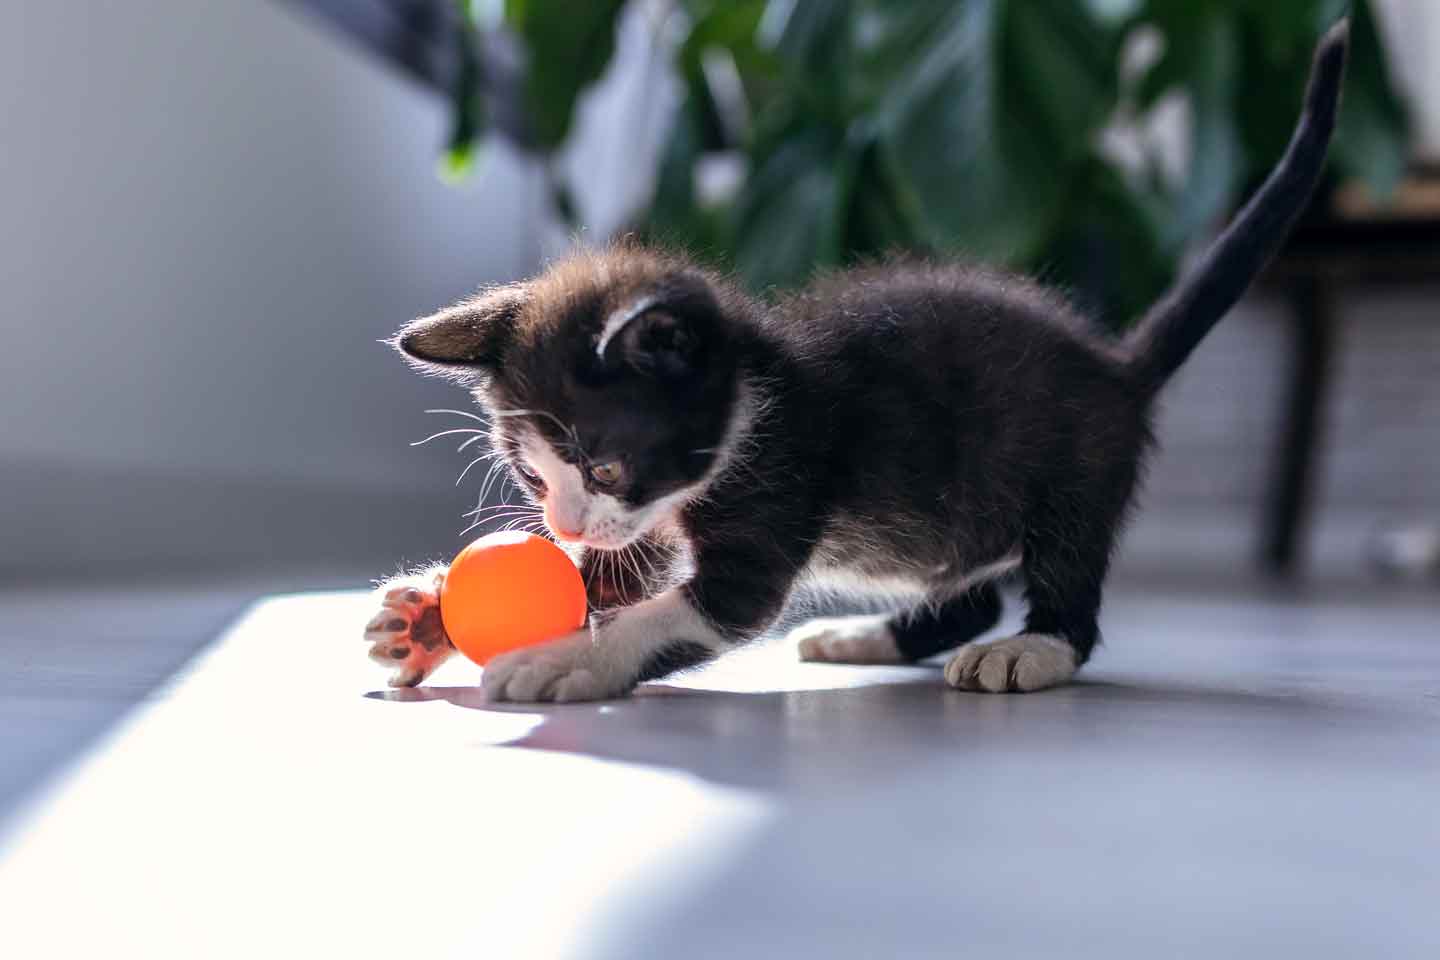 Photo of a kitten playing with a ball